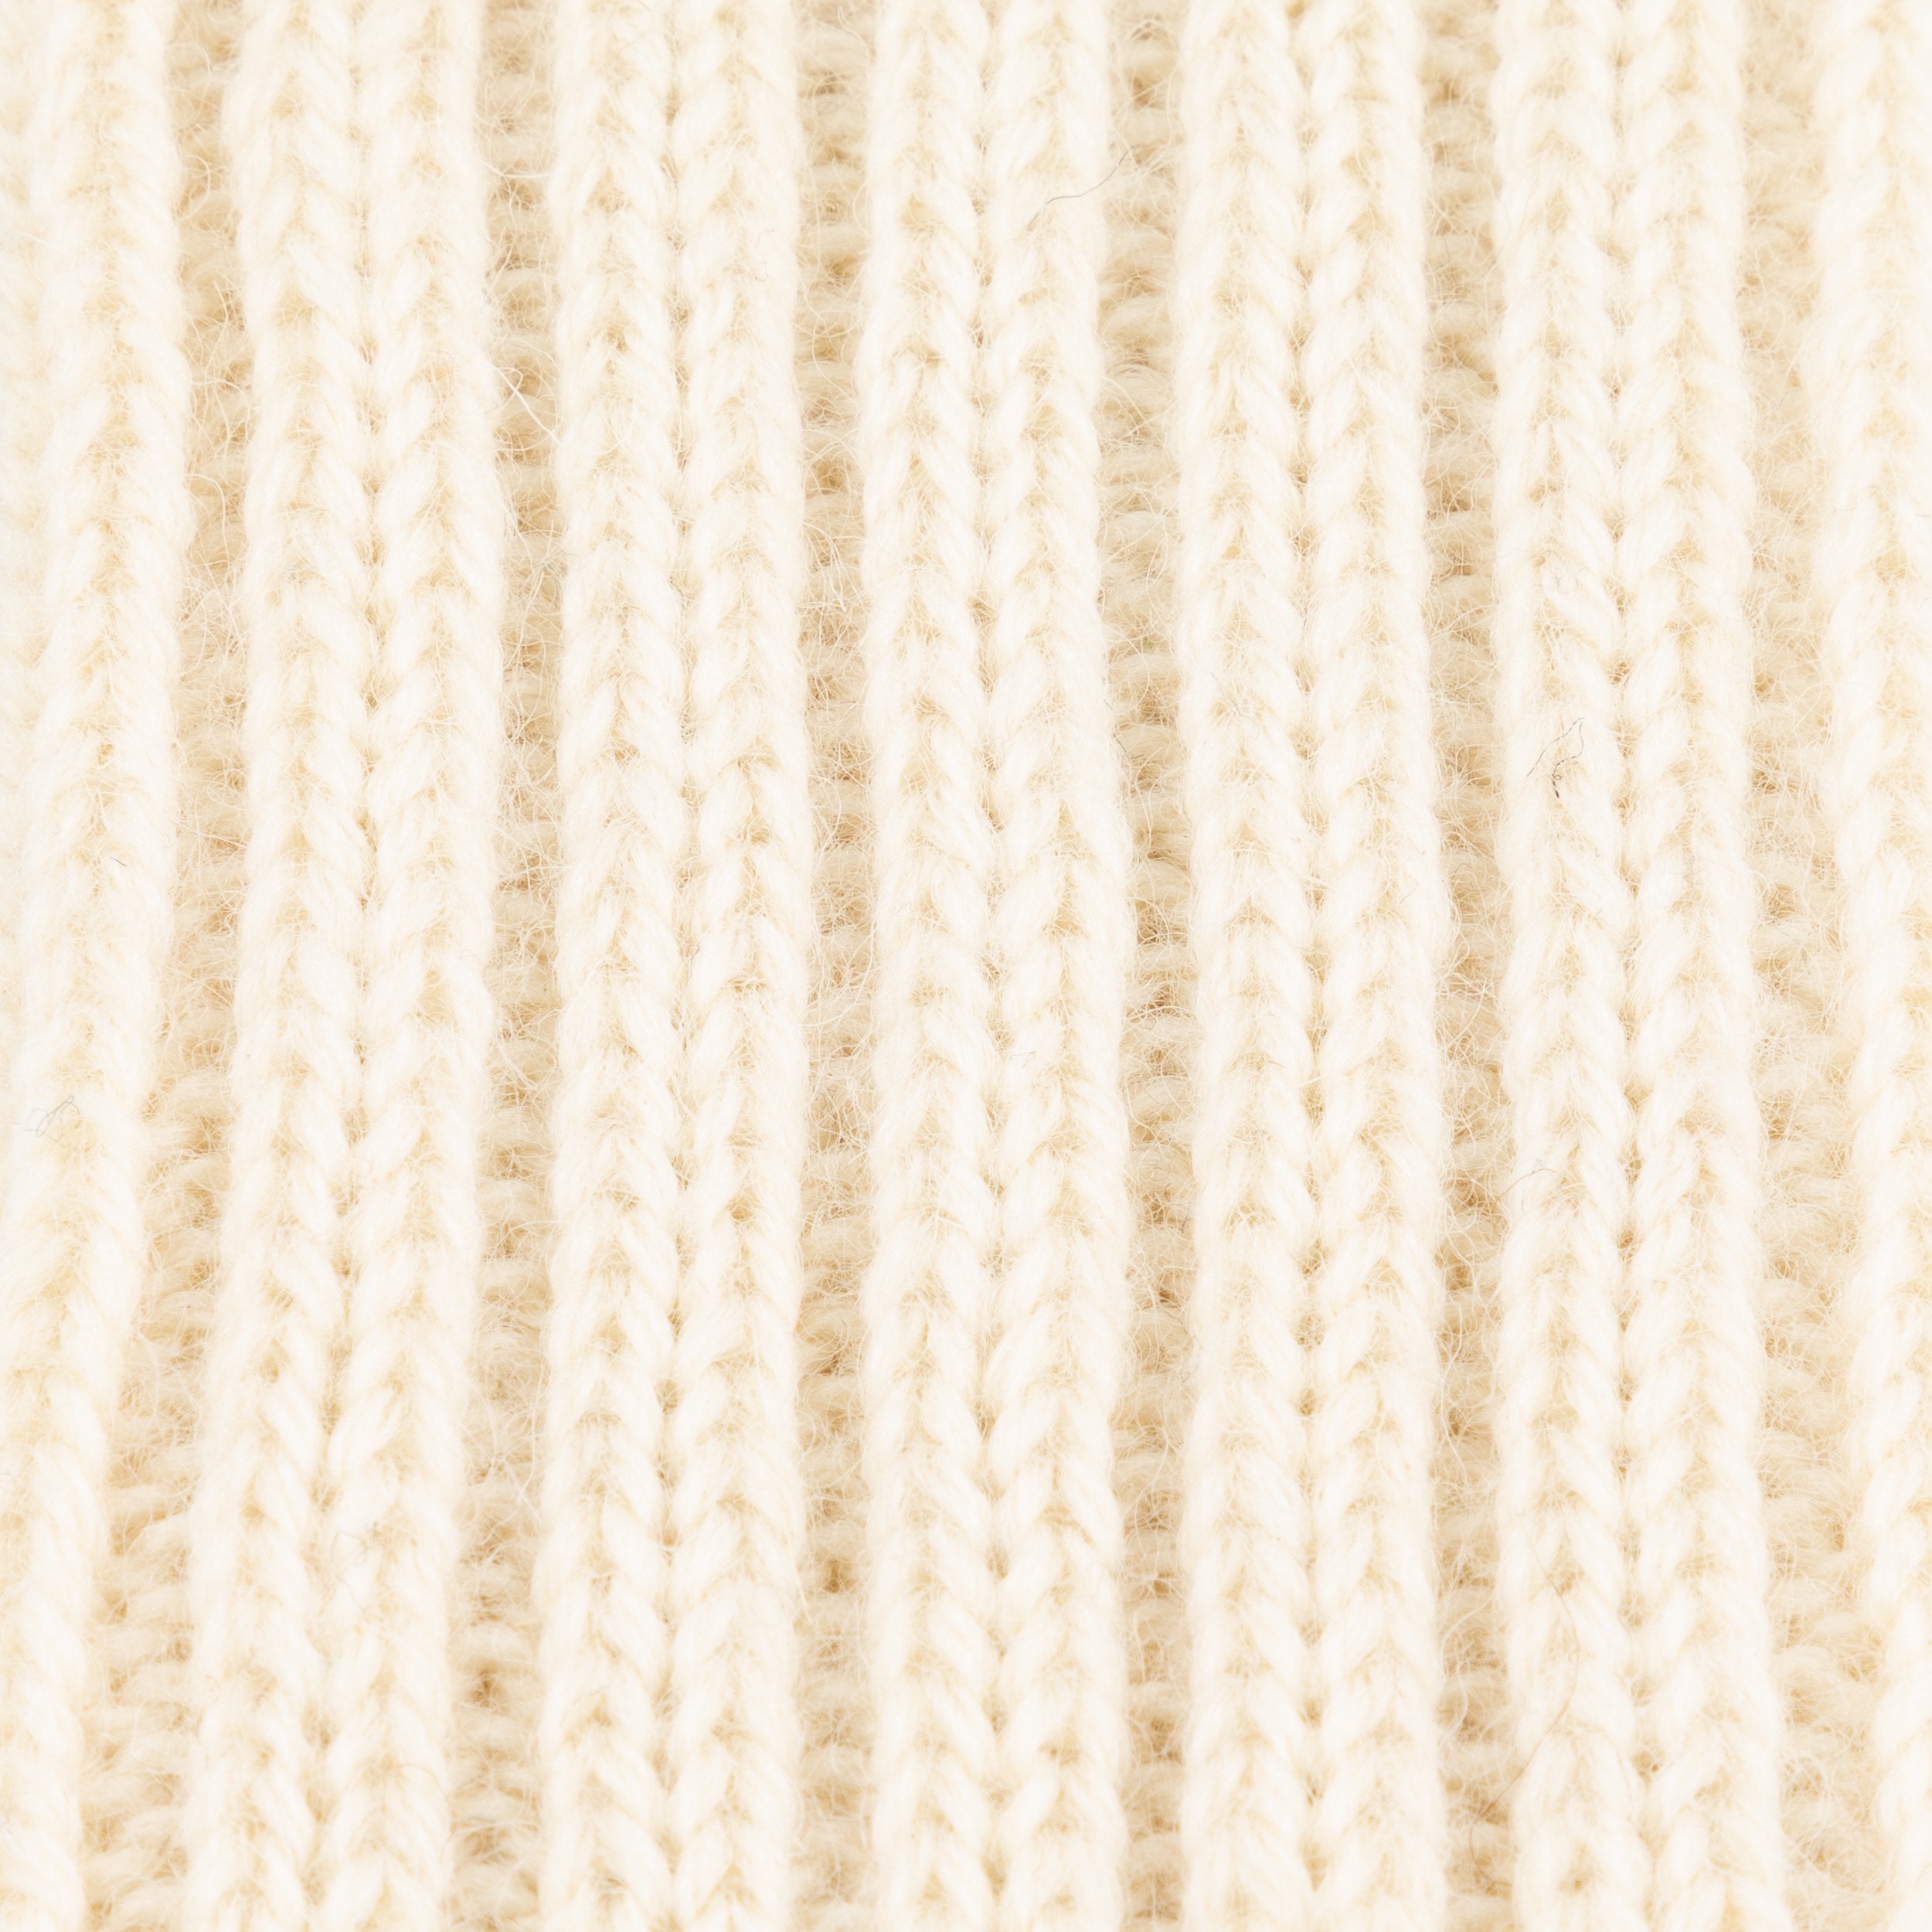 Close up of the Carrier Company Wool Sock in Aran